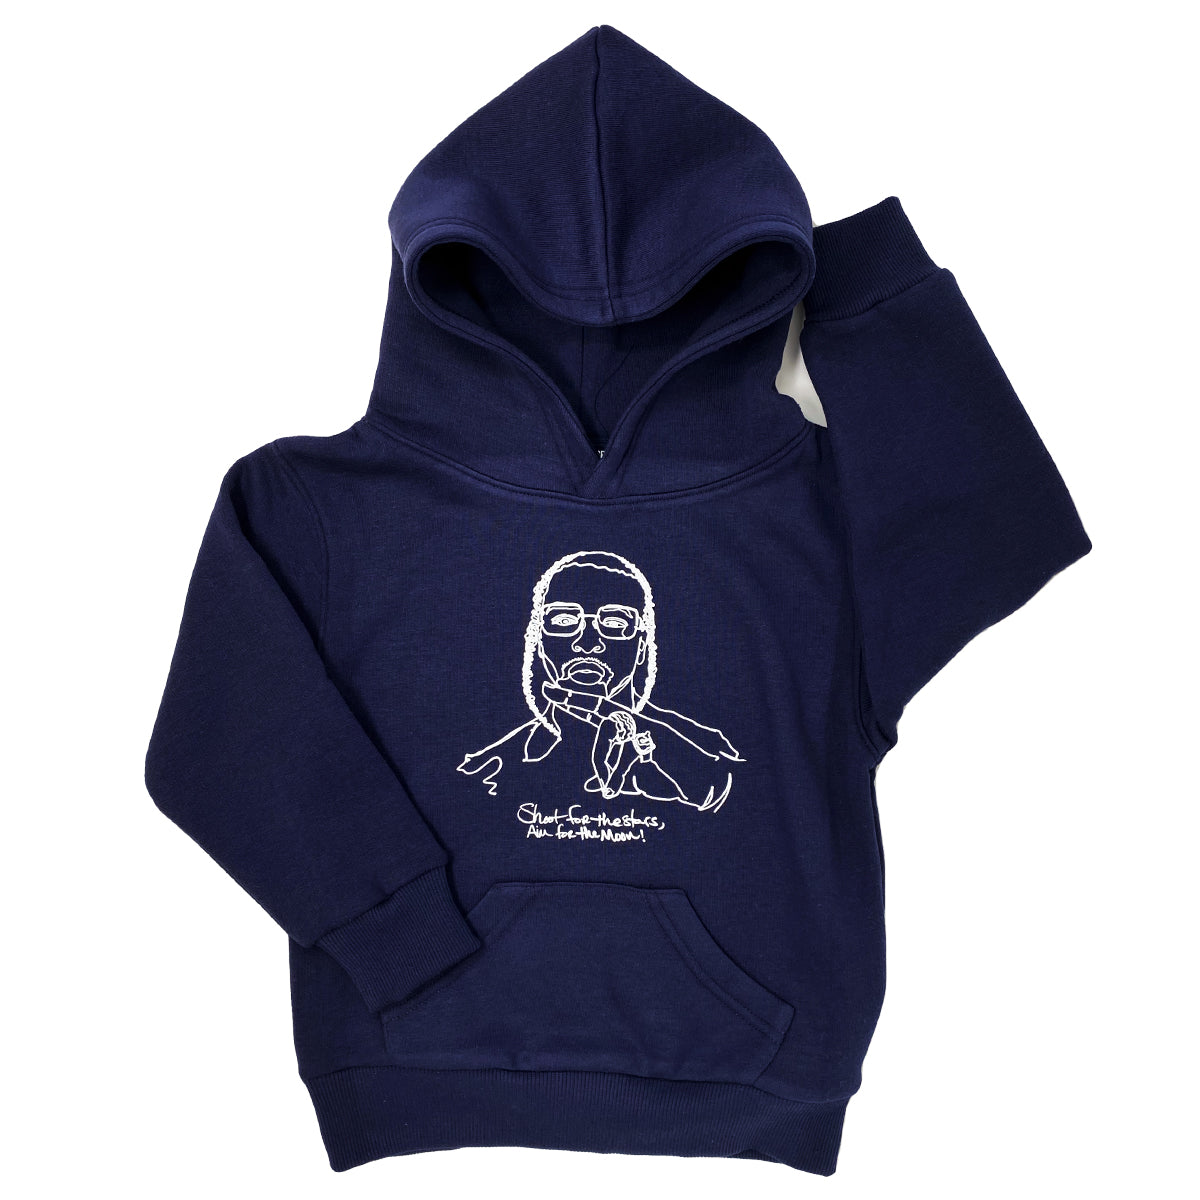 Shoot For The Stars Hoodie (Navy)